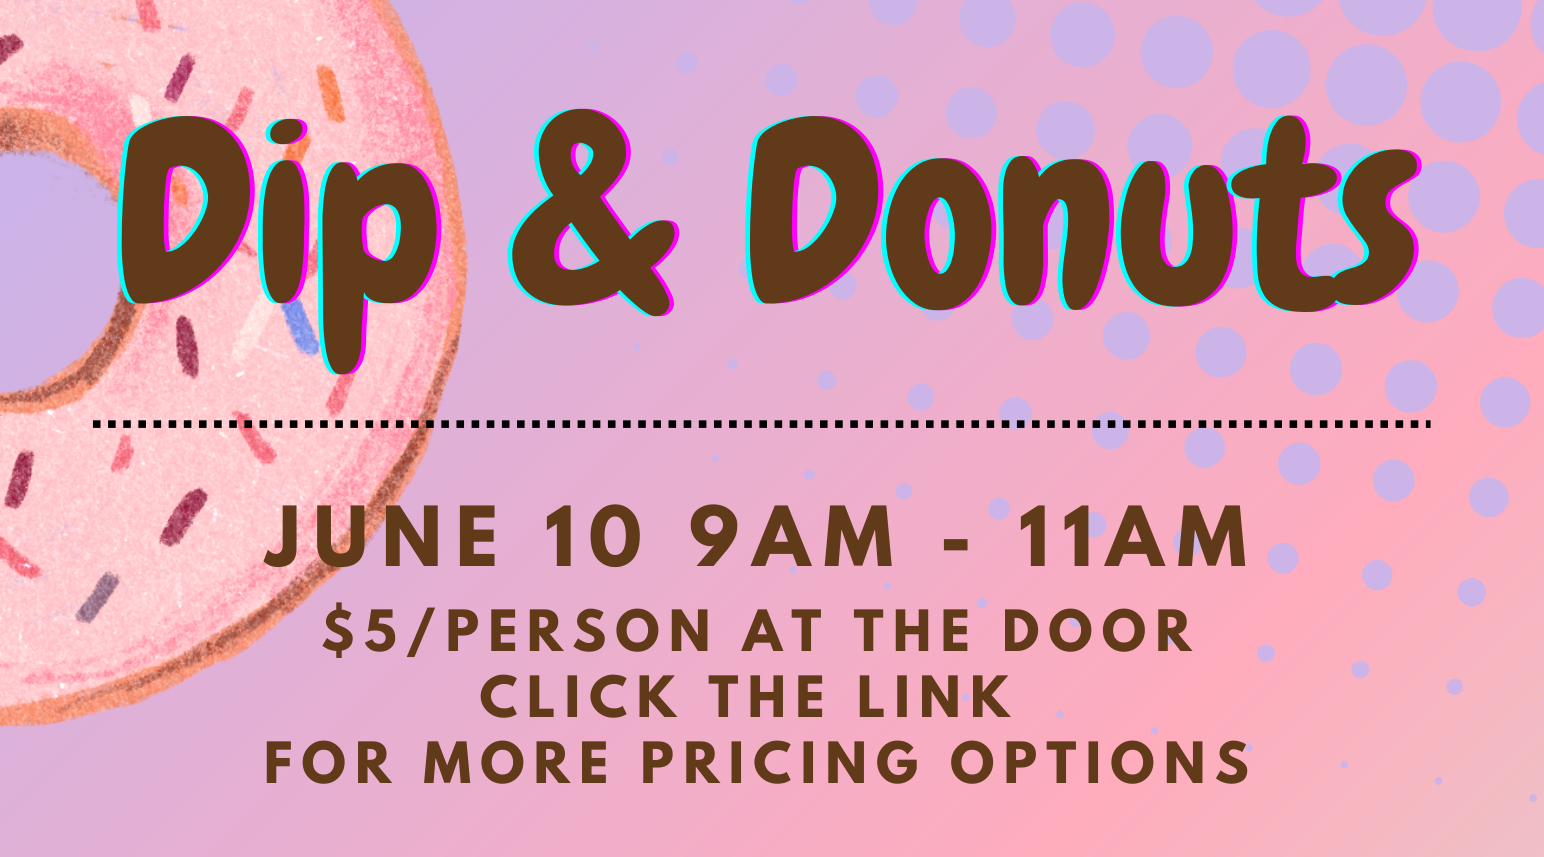 Dip & Donuts. June 10 9am-11am. Click for pricing.